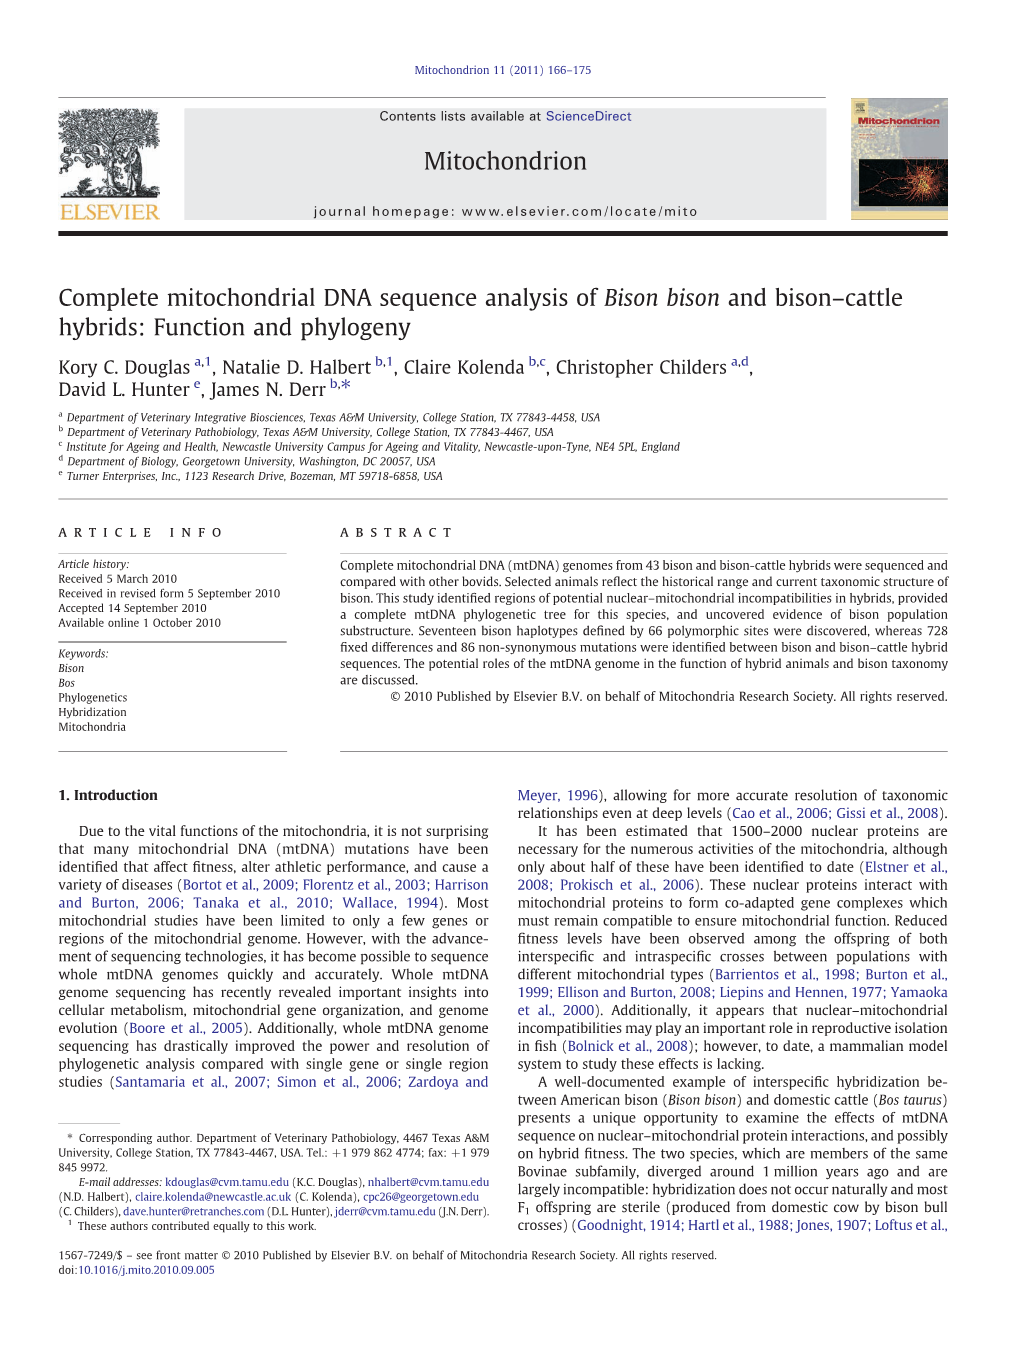 Complete Mitochondrial DNA Sequence Analysis of Bison Bison and Bison–Cattle Hybrids: Function and Phylogeny